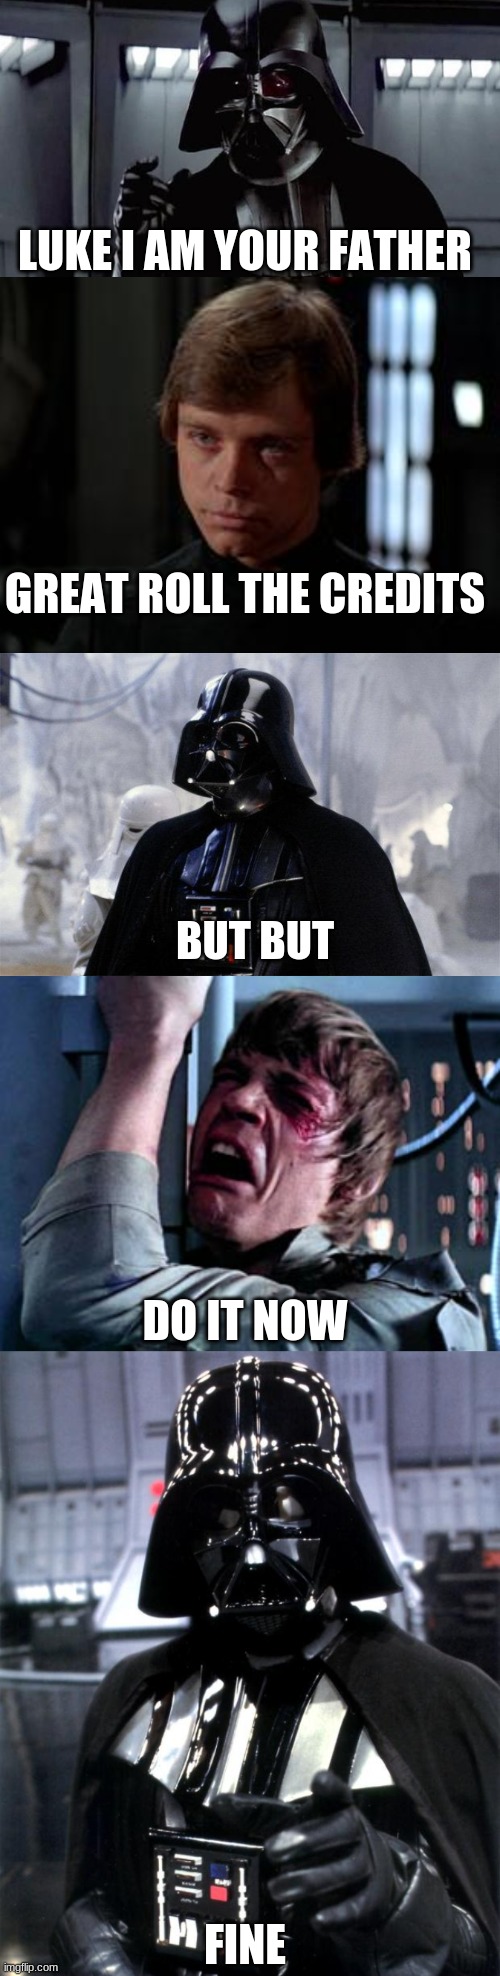 dissapointment | LUKE I AM YOUR FATHER; GREAT ROLL THE CREDITS; BUT BUT; DO IT NOW; FINE | image tagged in darth vader,luke skywalker | made w/ Imgflip meme maker